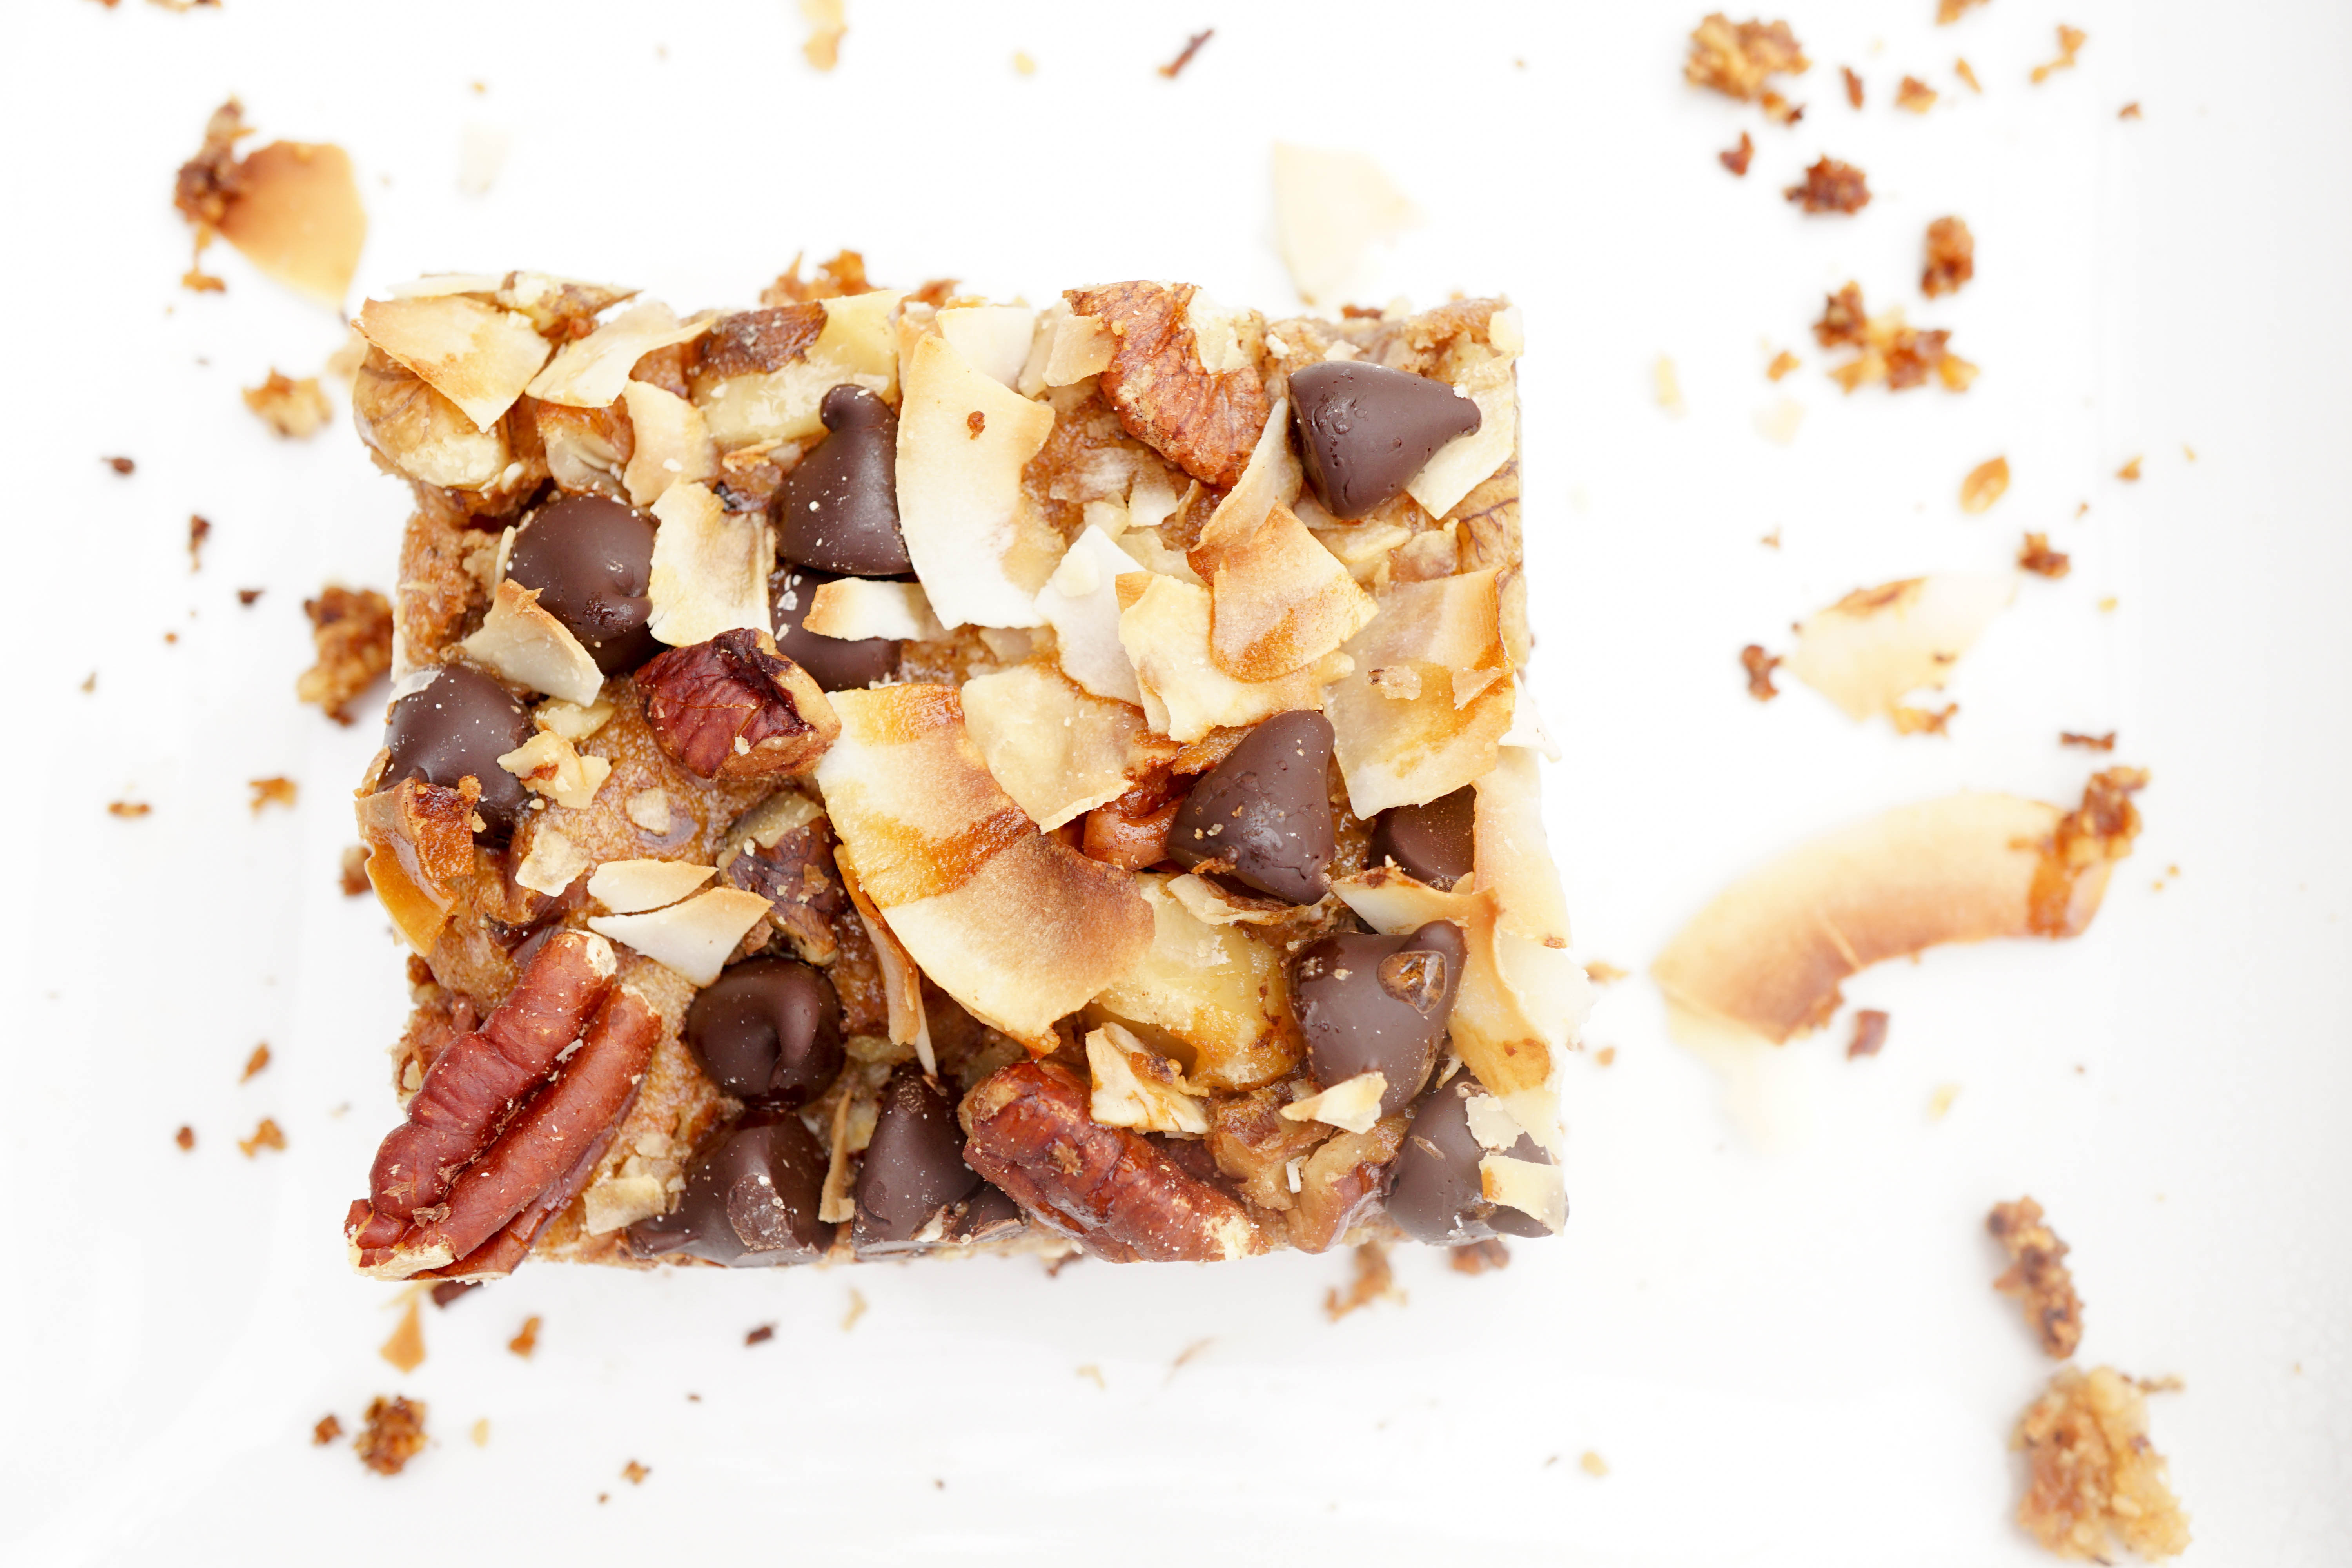 Magic Bars Recipe - The perfect goey chocolate and caramelly bar that's actually healthy! Gluten free, dairy free and refined sugar free! yes please